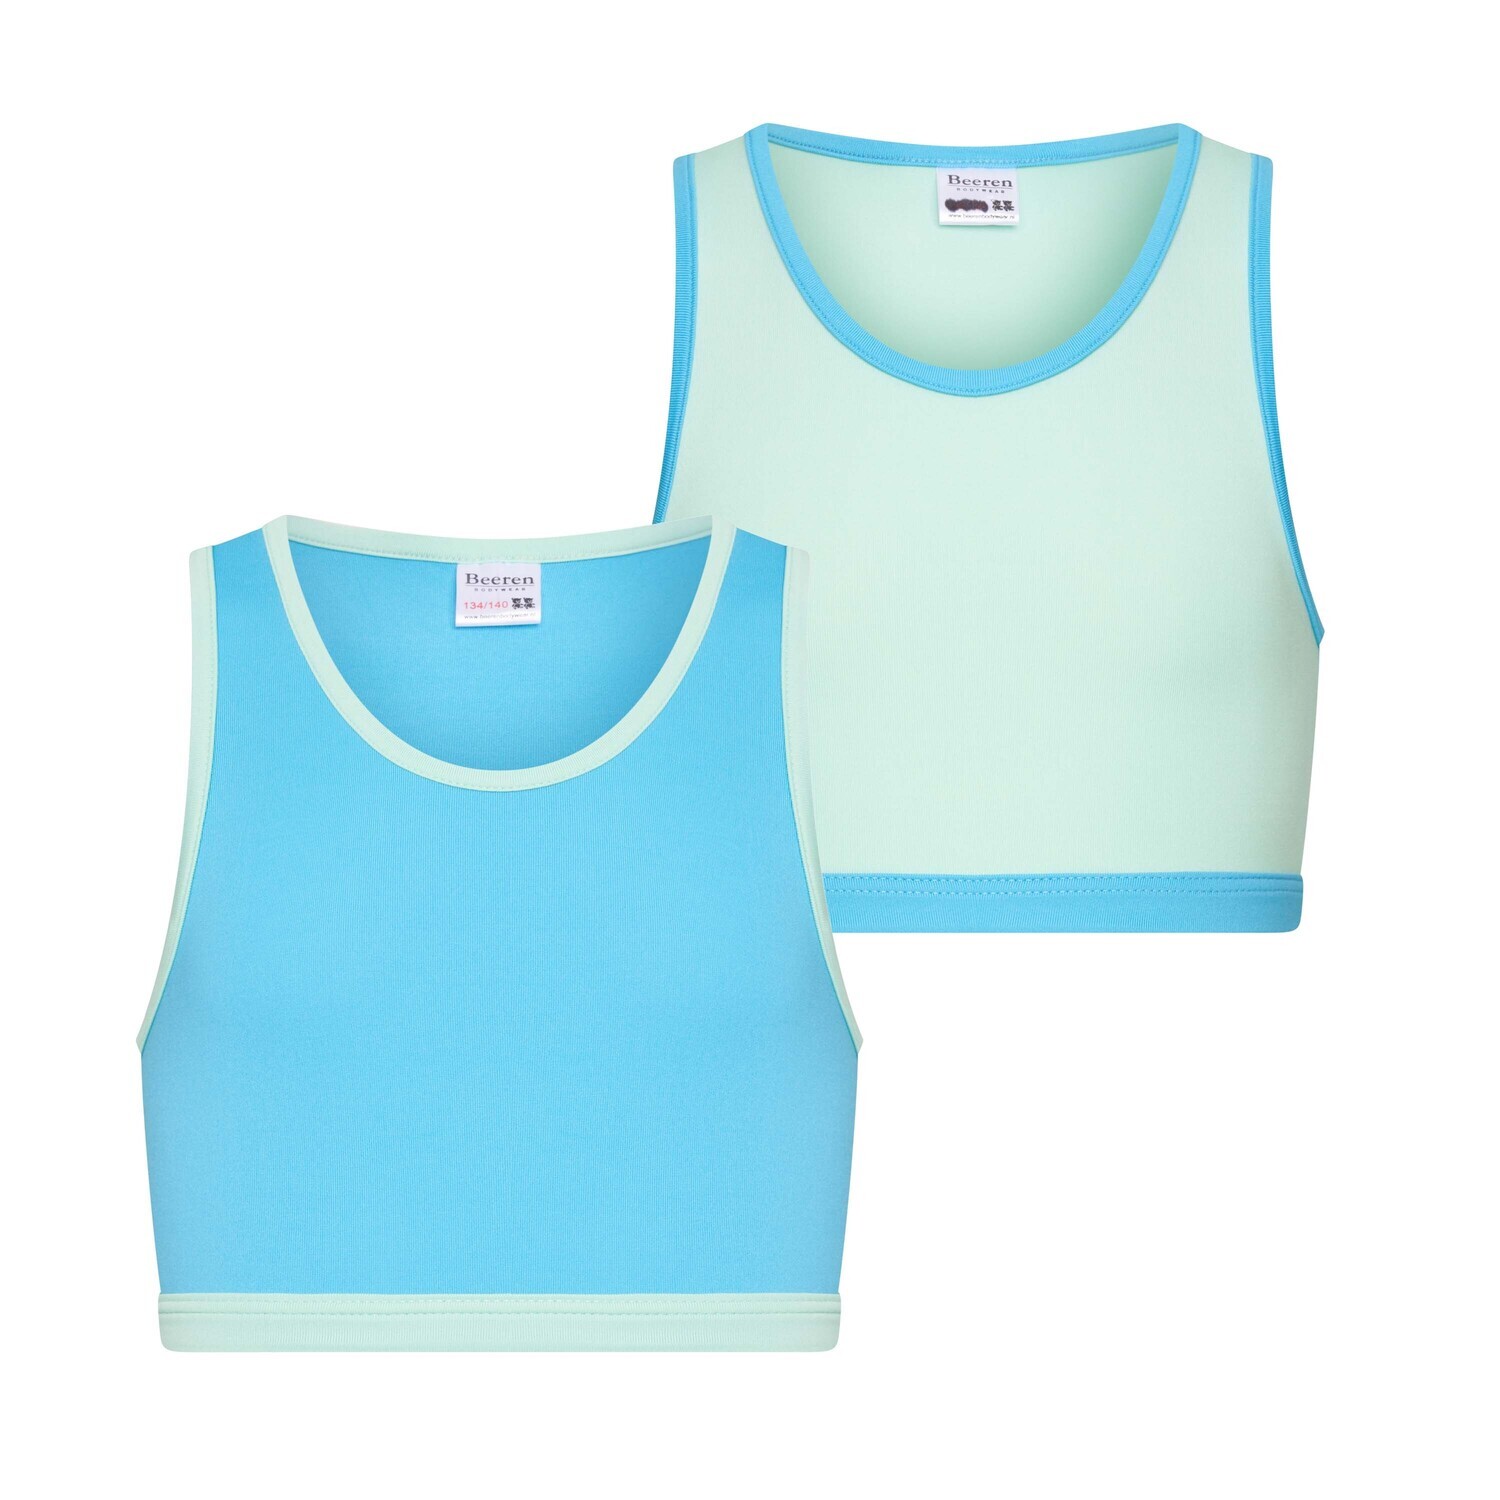 (08-251) Meisjes hesje Mix and Match 2-Pack turquoise/mint 170/176